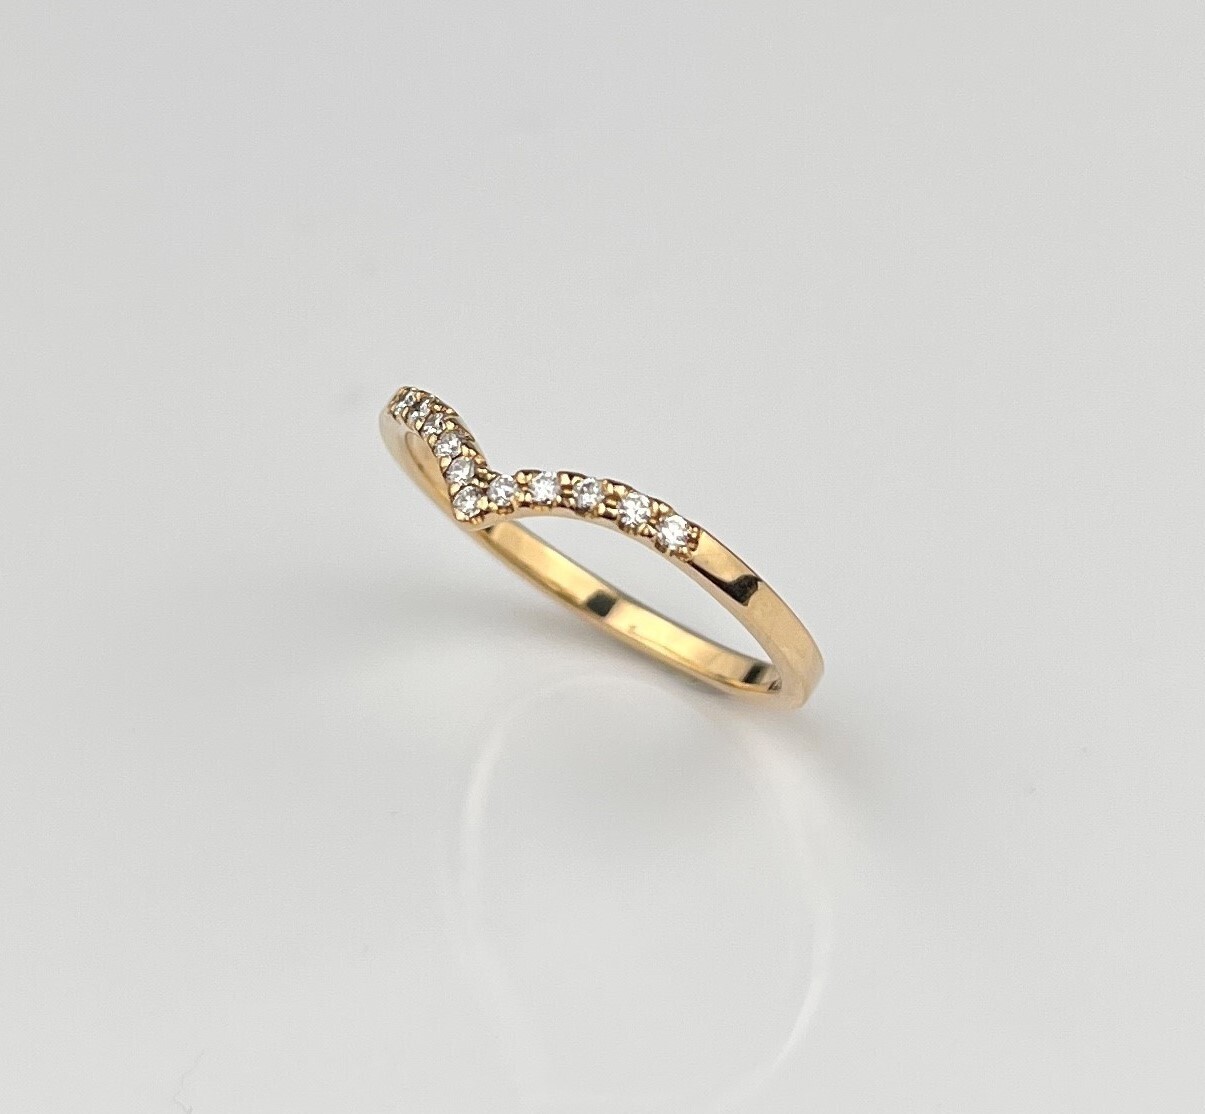 14K Gold Ring with 11 White Diamonds Size 6.25